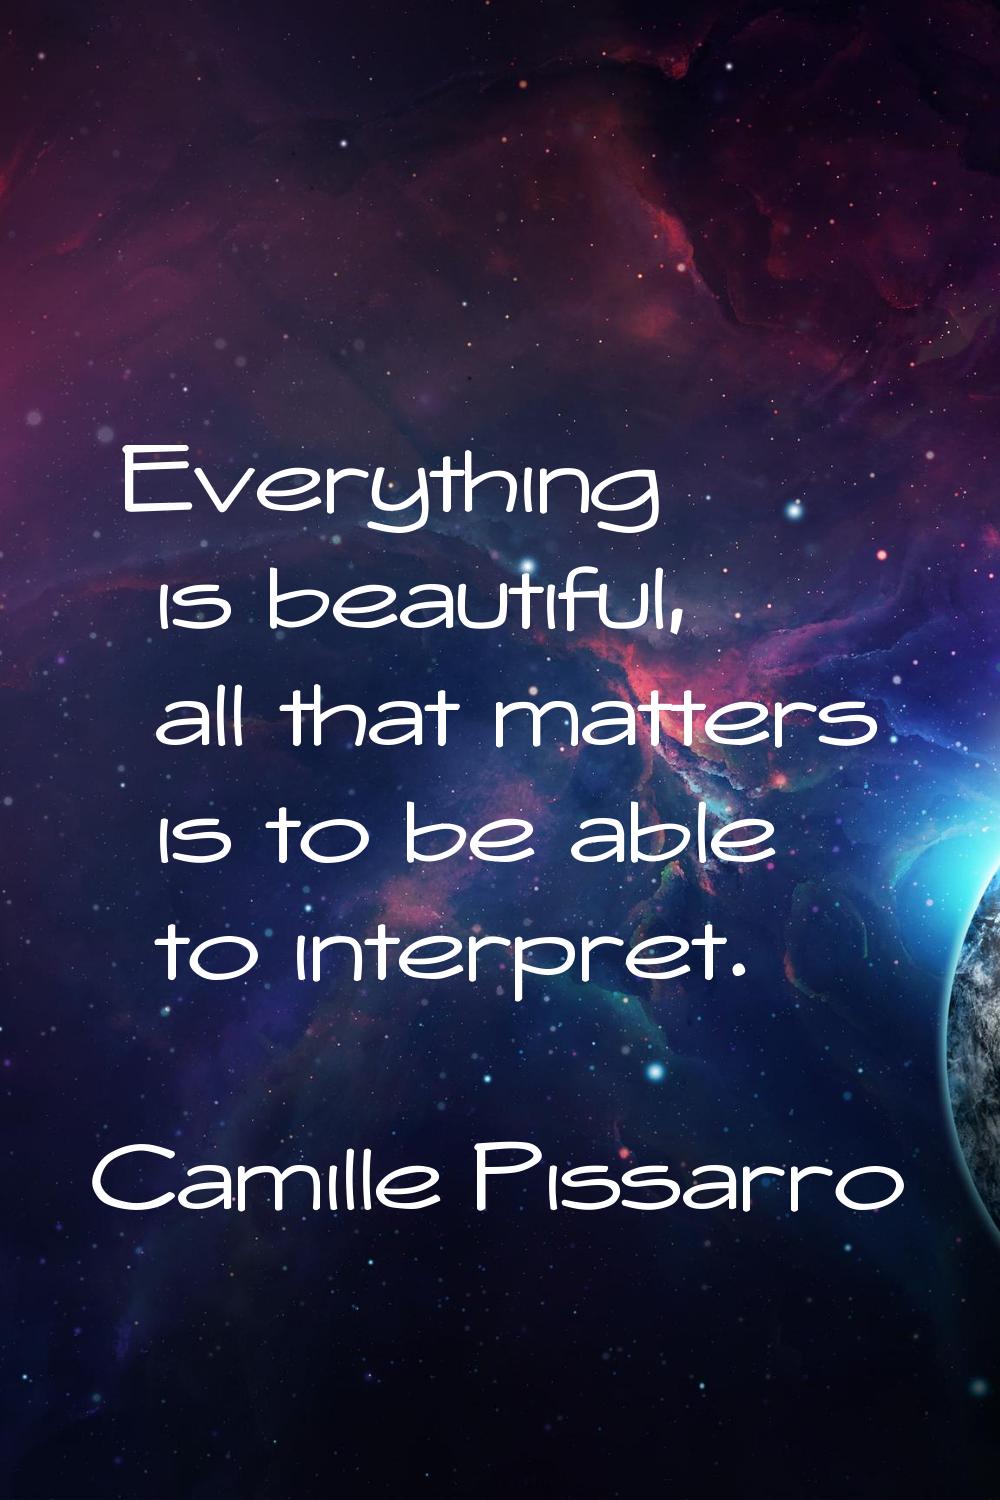 Everything is beautiful, all that matters is to be able to interpret.